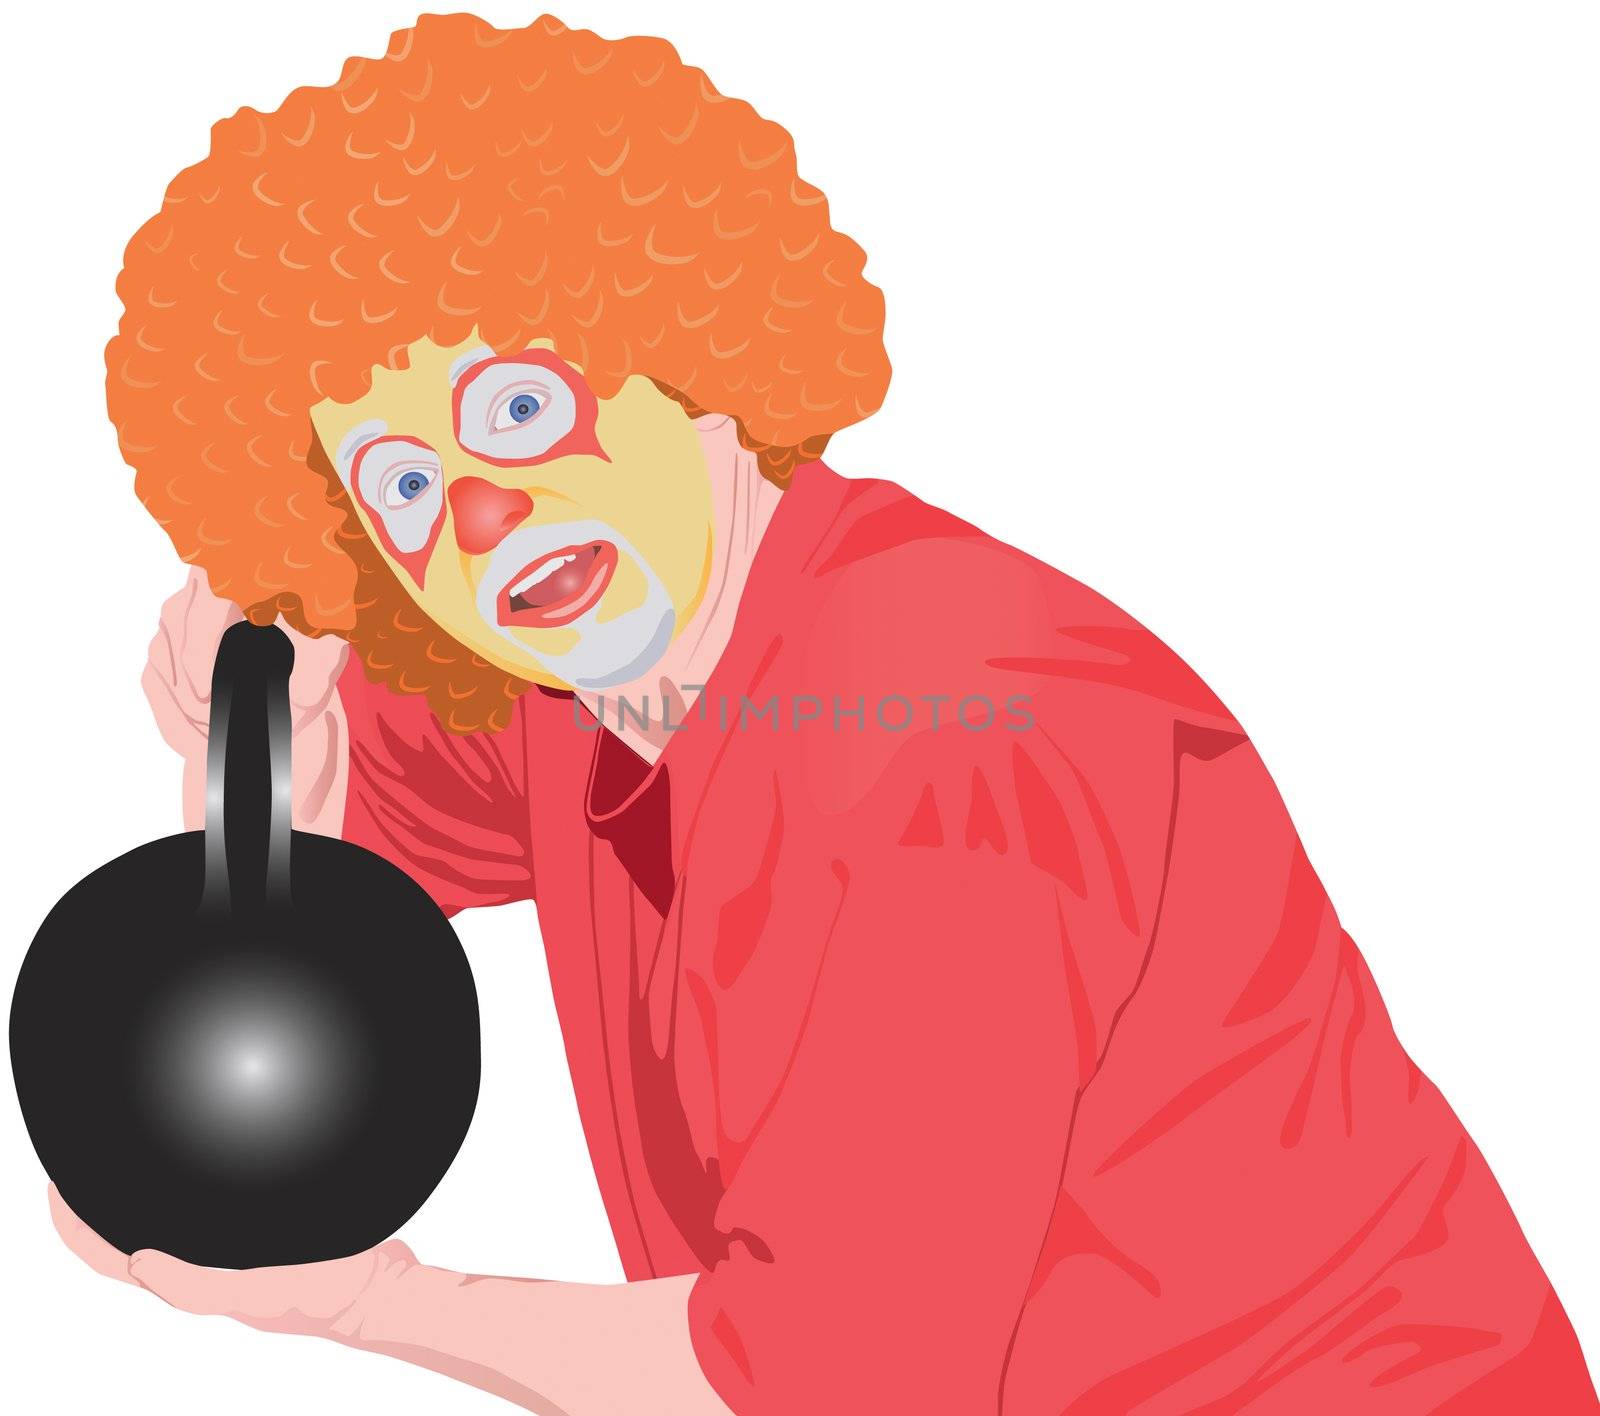 The clown with a weight